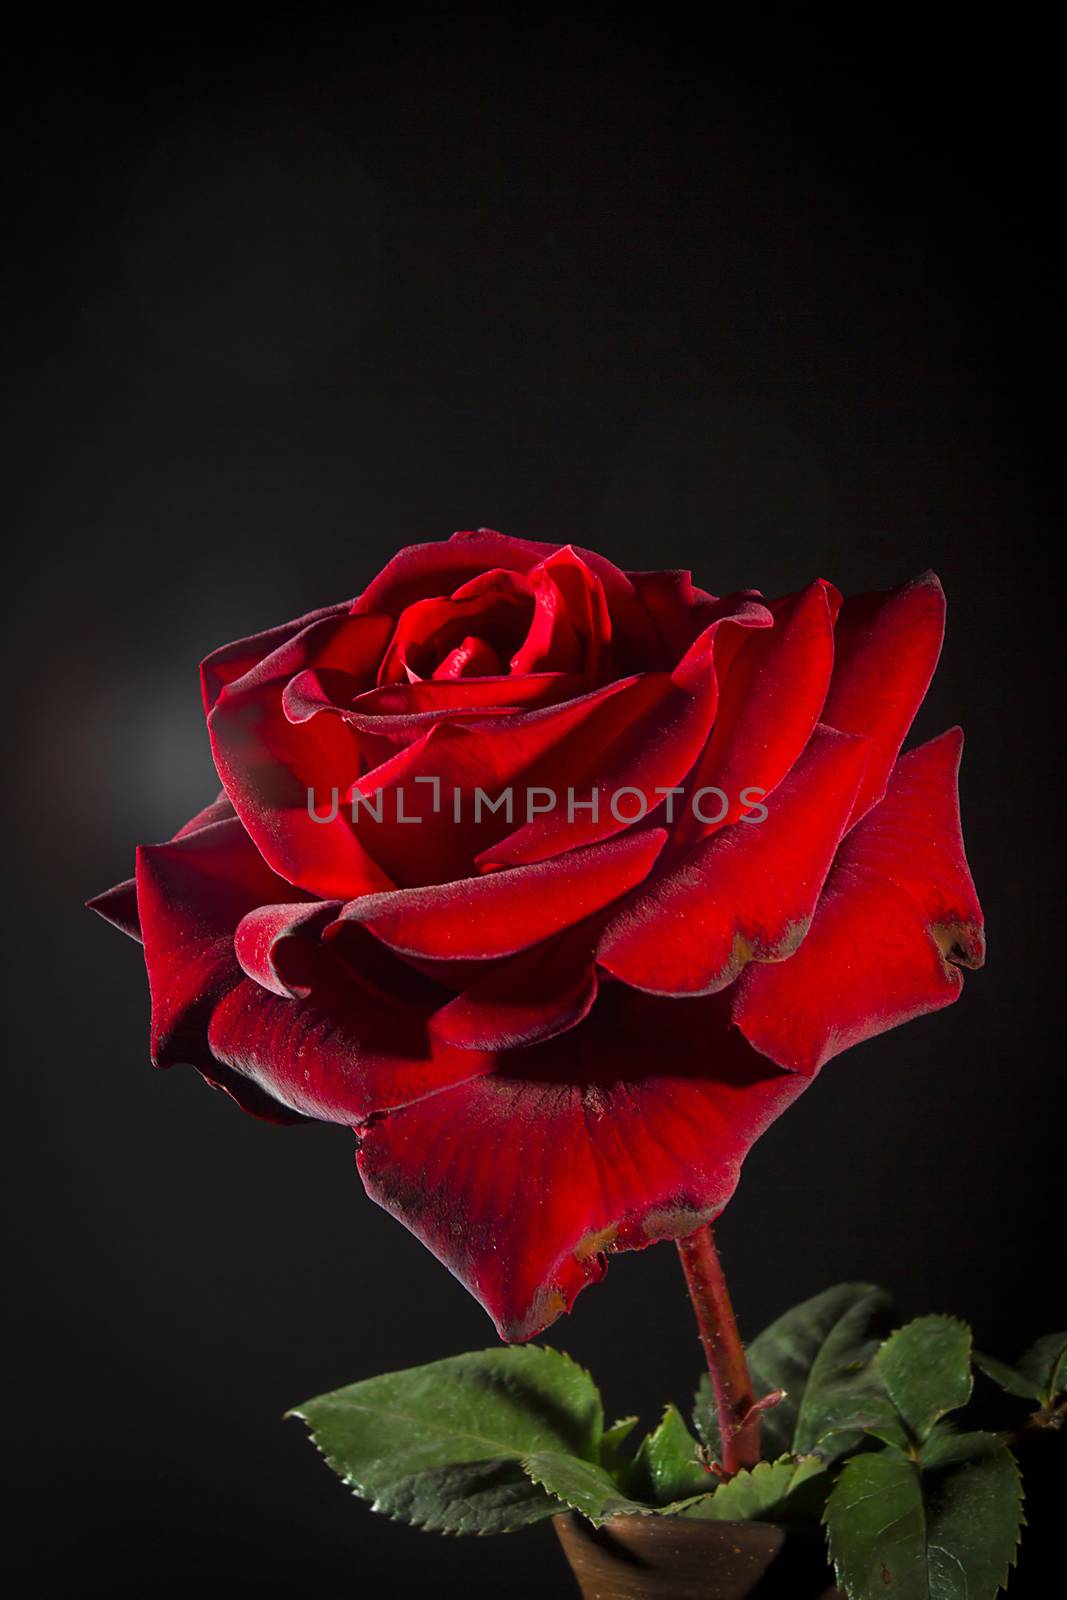 Red rose close-up on a black background